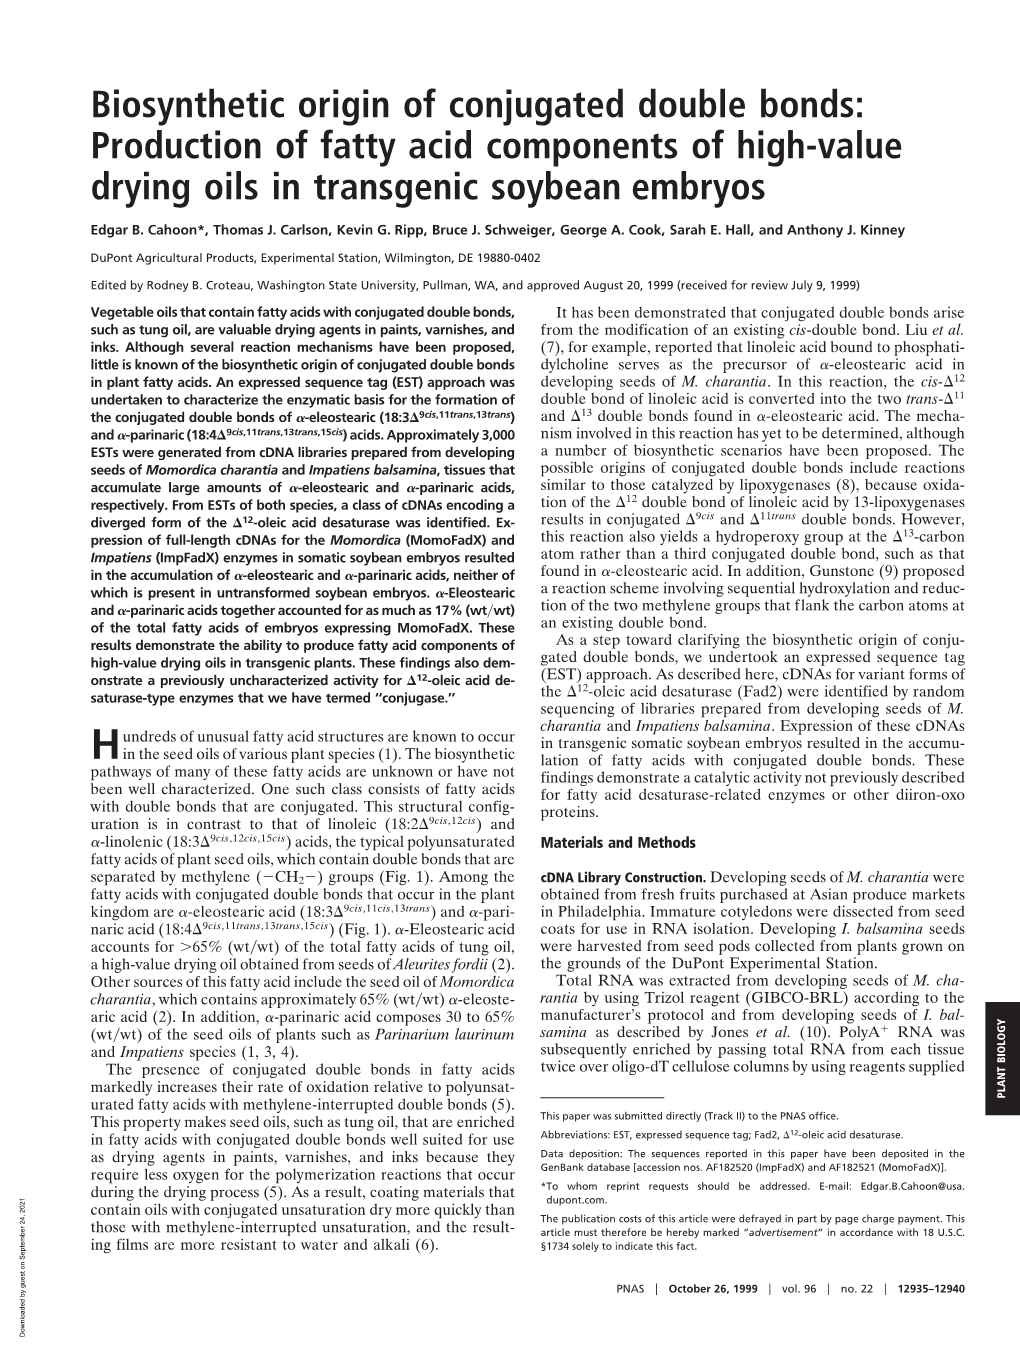 Biosynthetic Origin of Conjugated Double Bonds: Production of Fatty Acid Components of High-Value Drying Oils in Transgenic Soybean Embryos